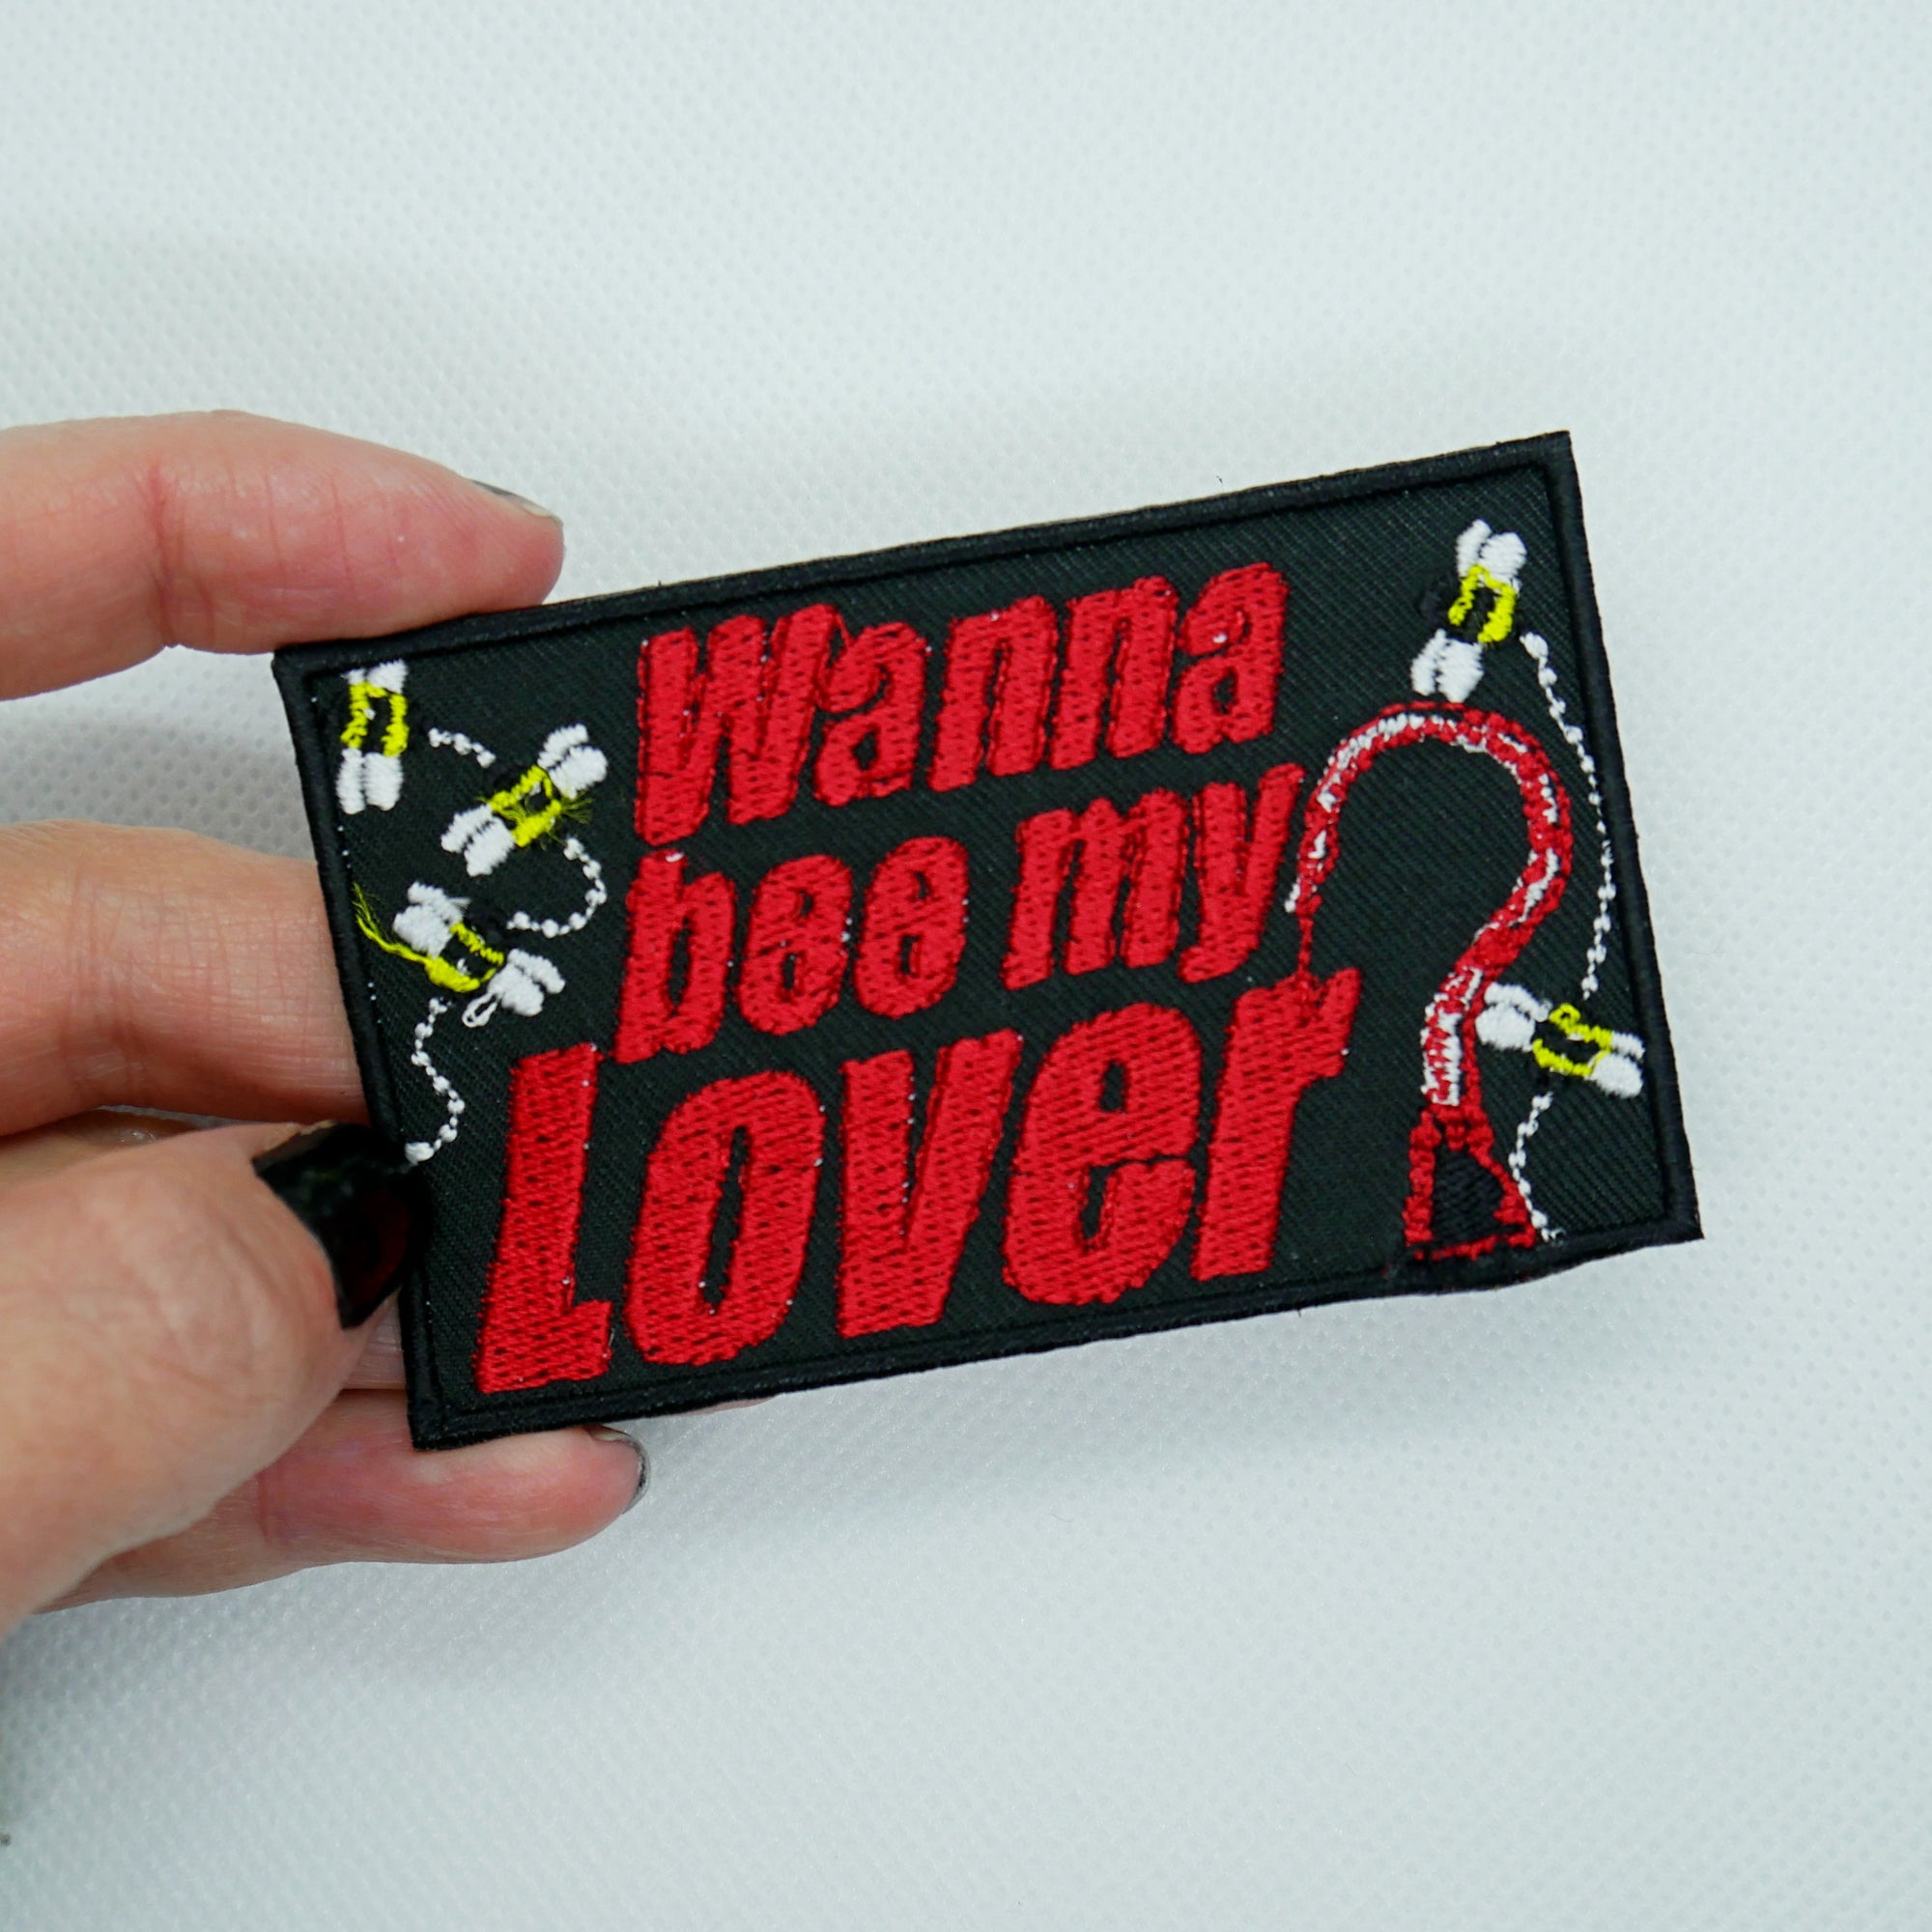 Wanna be my Lover - Candyman Inspired Patch